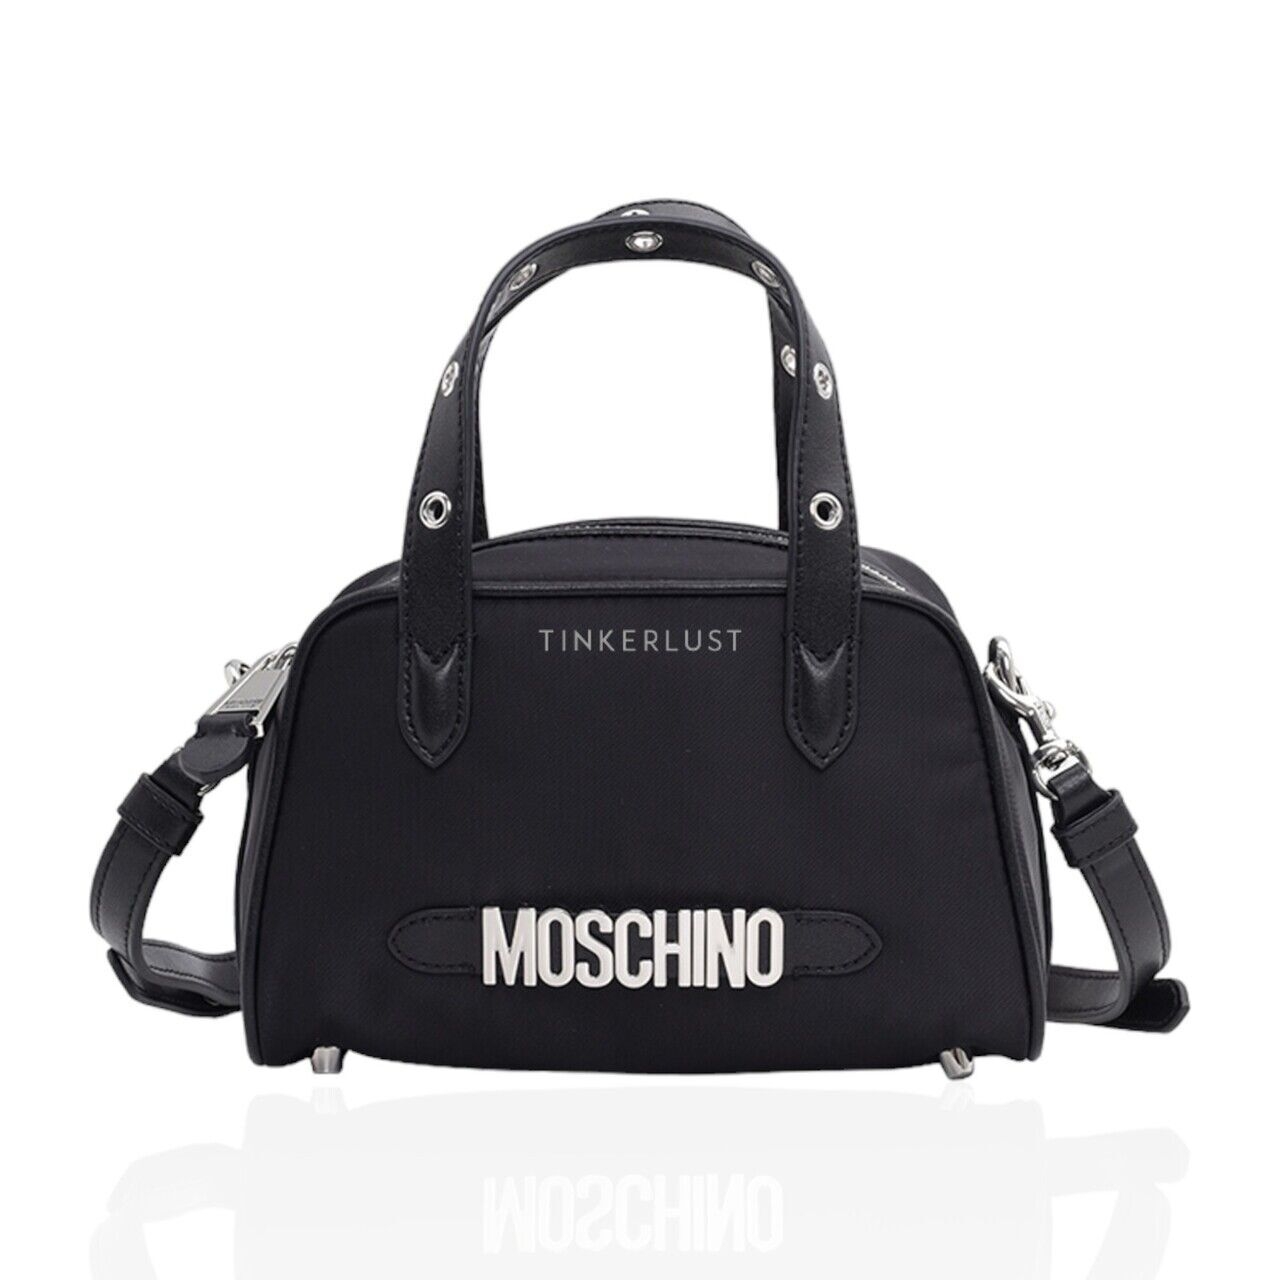 Moschino Logo Top Handle in Black SHW with Metal Detail Satchel Bag